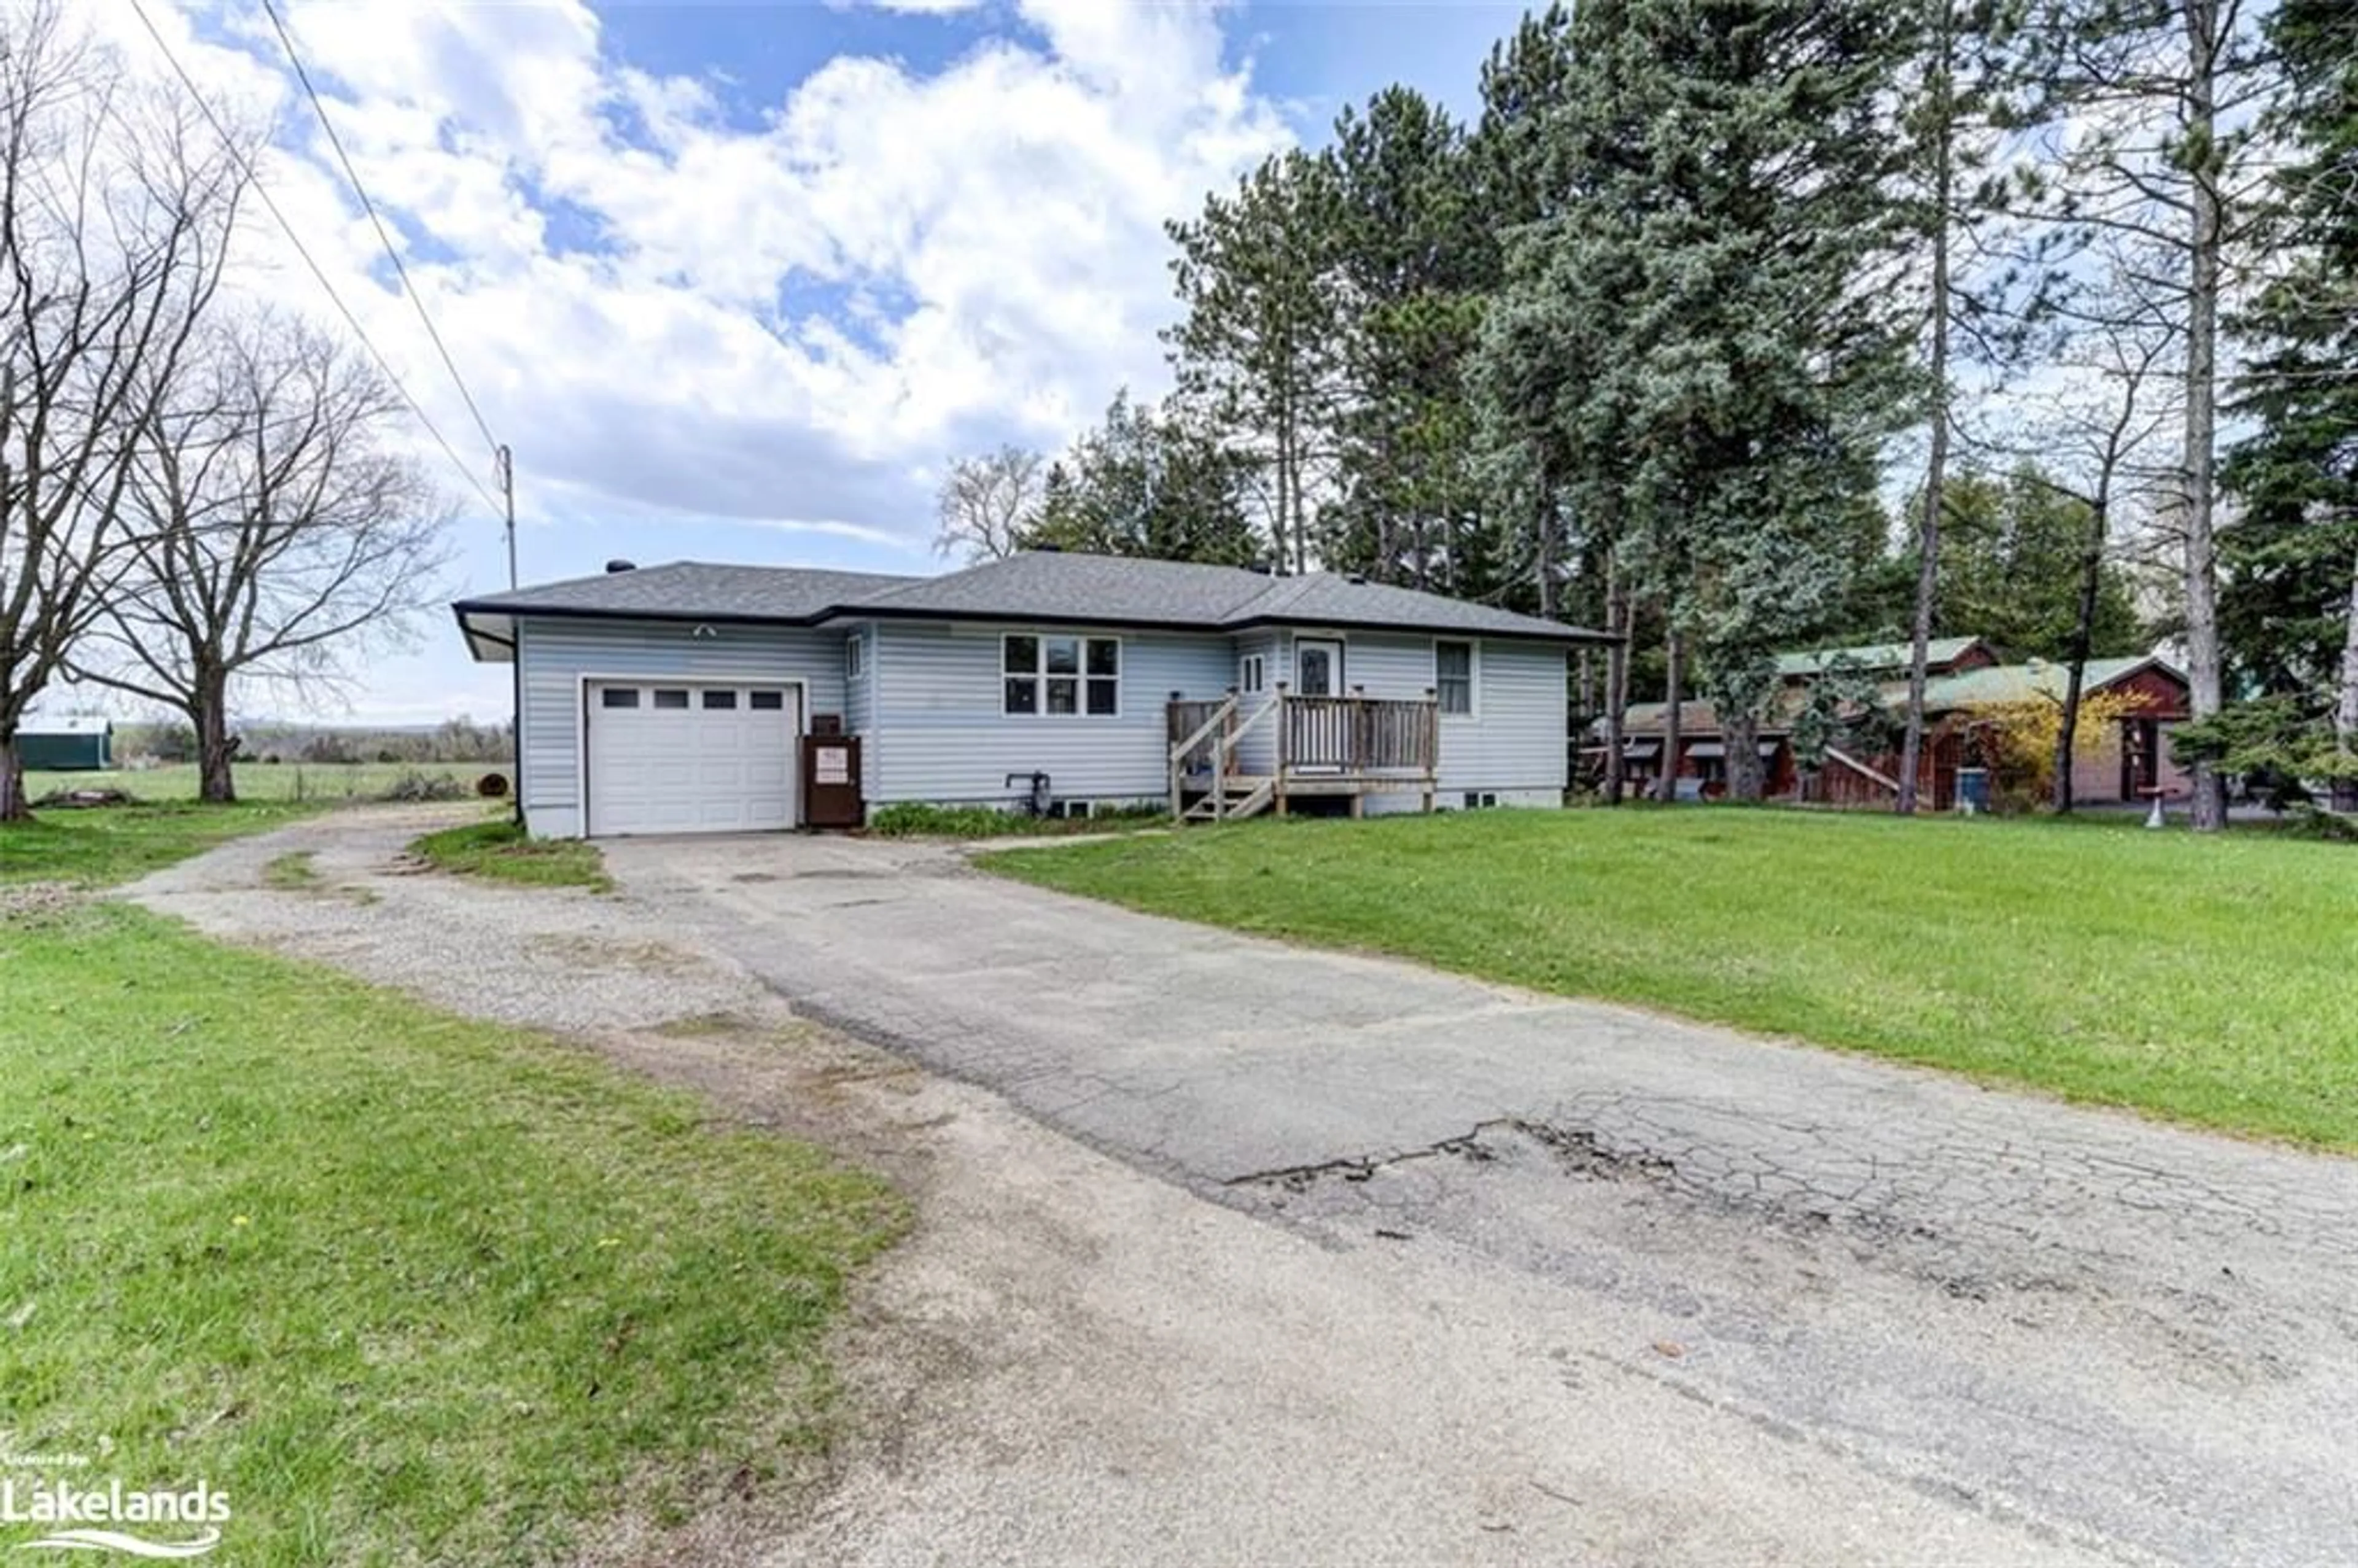 Frontside or backside of a home for 7617 26 Hwy, Stayner Ontario L0M 1S0